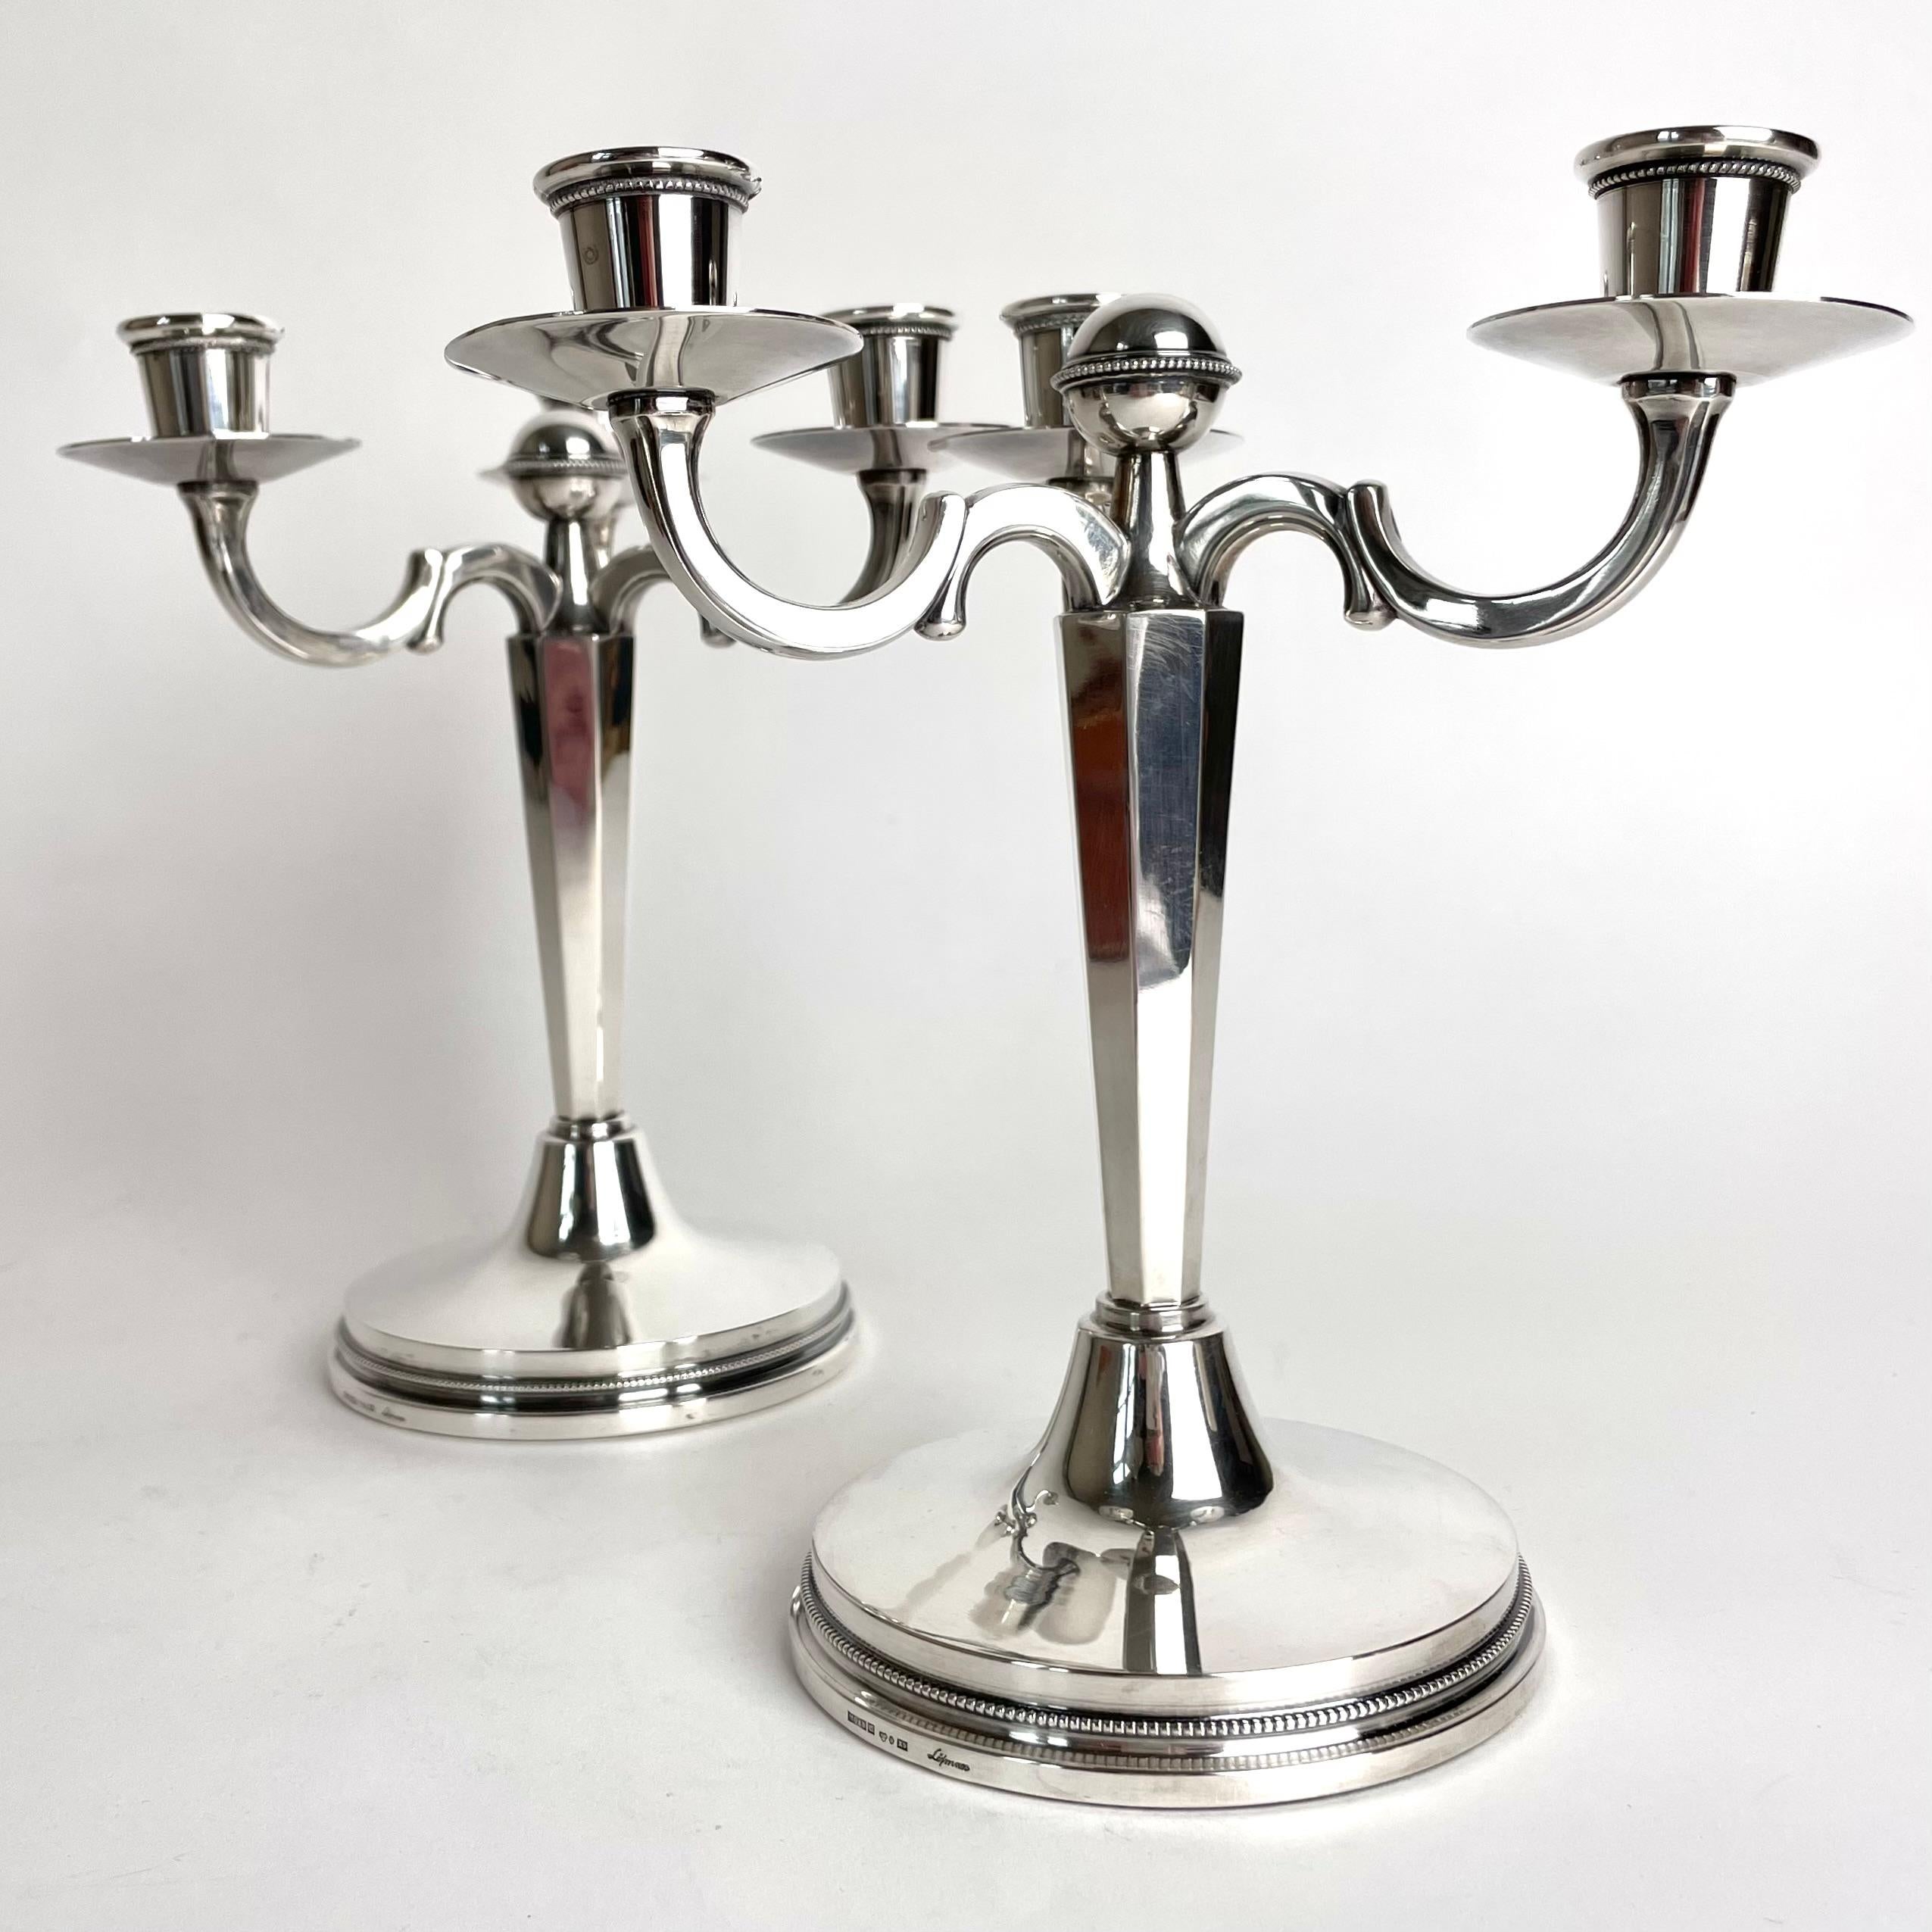 A pair of small and elegant candelabras in classic design in Silver by Eric Löfman, Markströms Guldsmedsaktiebolag, Sweden in 1972 (X9)

Wear consistent with age and use 